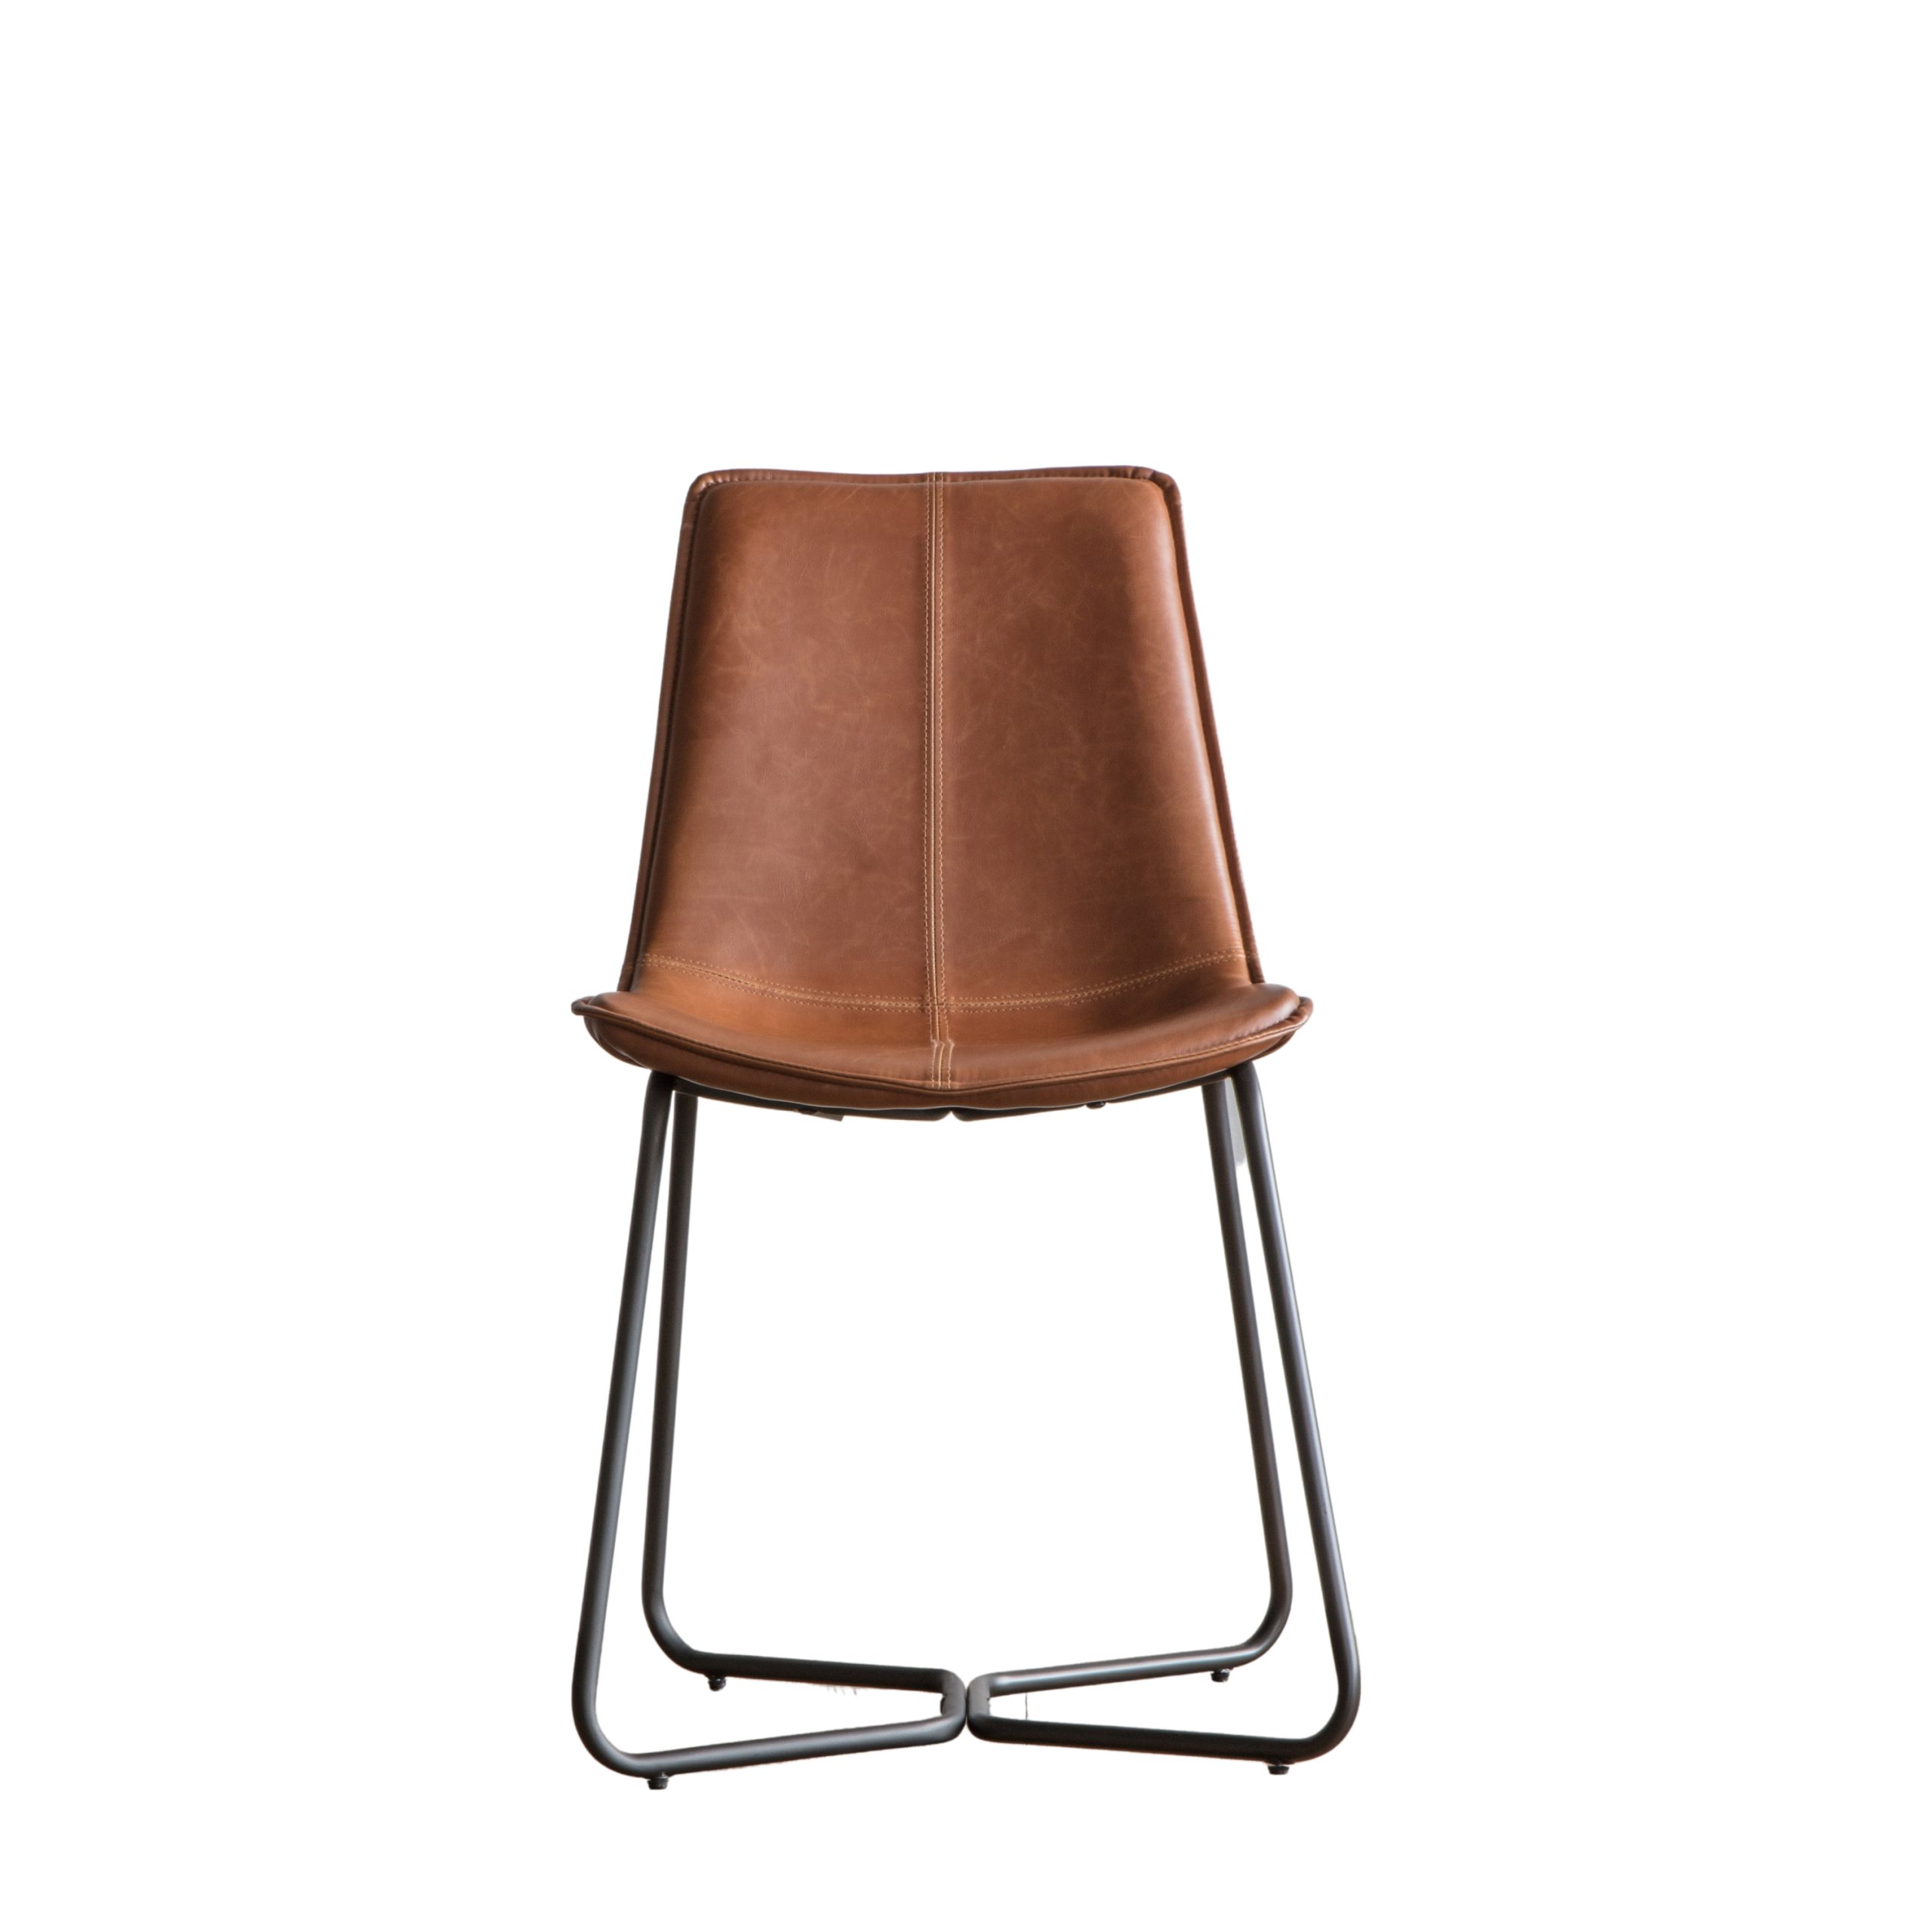 Gallery Direct Hawking Chair Brown (Set of 2)